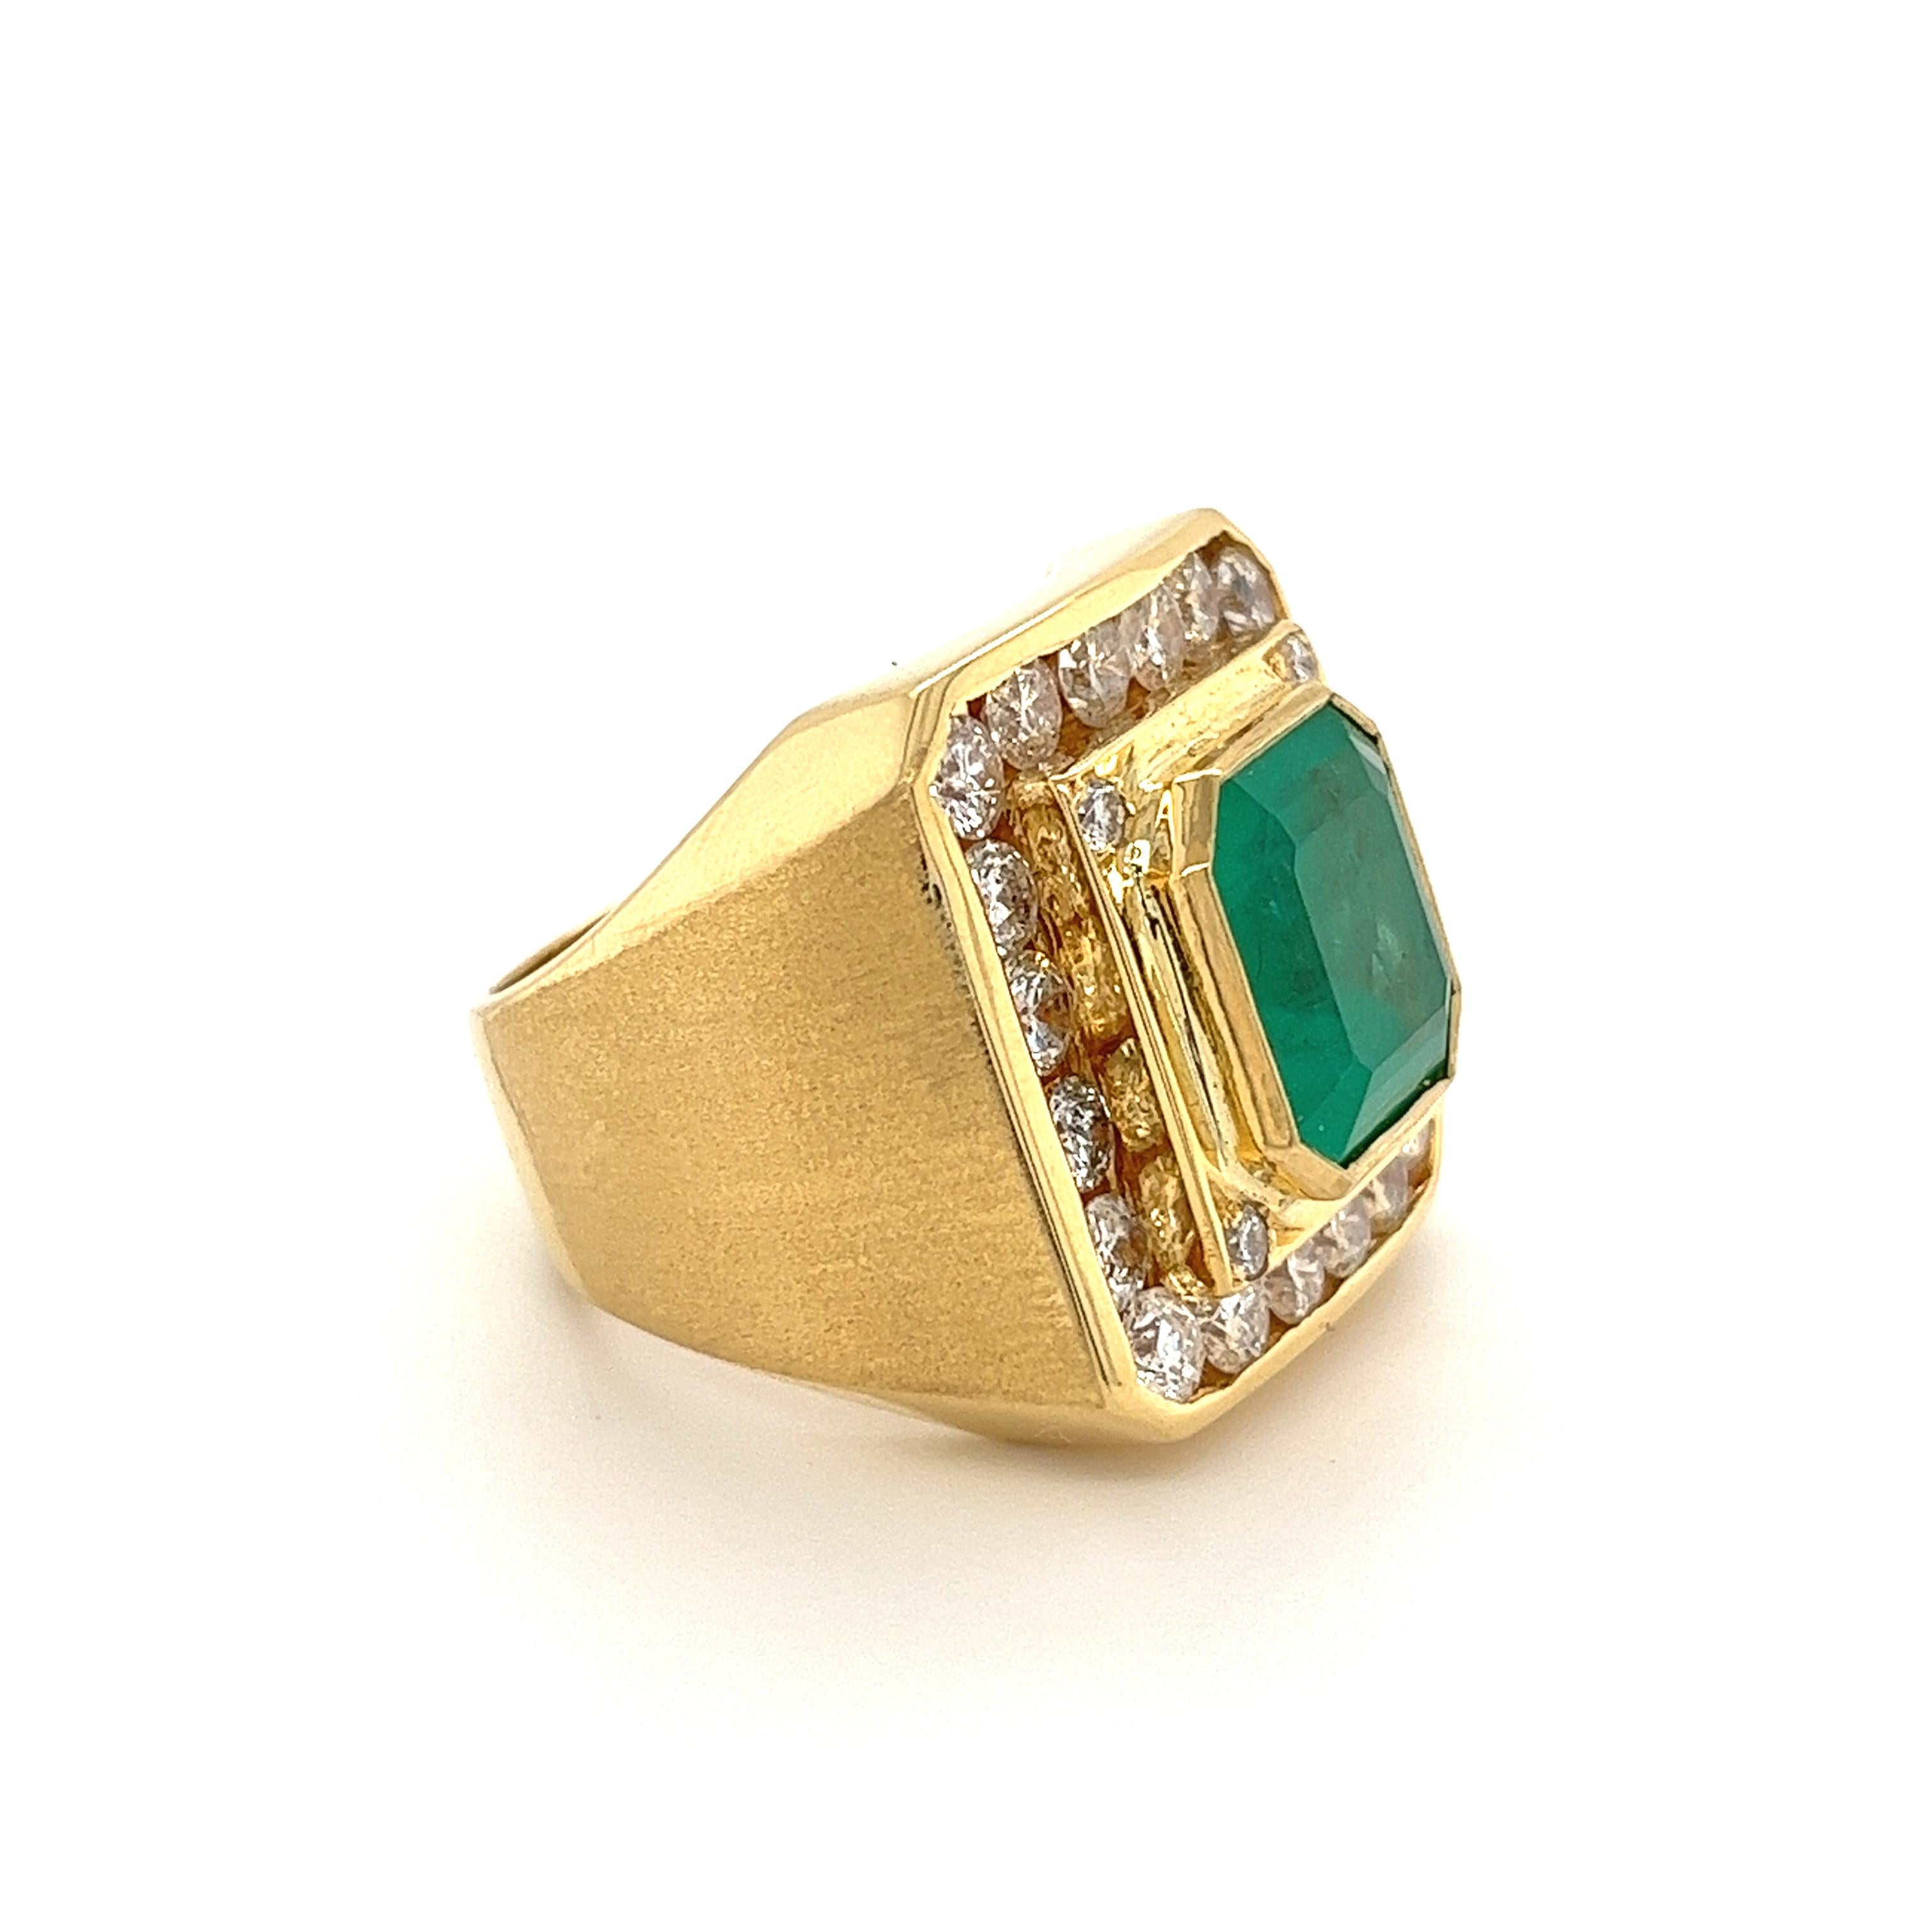 Emerald Cut 5 Carat Colombian Emerald Mens Ring with Round Diamond Halo in 18k Yellow Gold